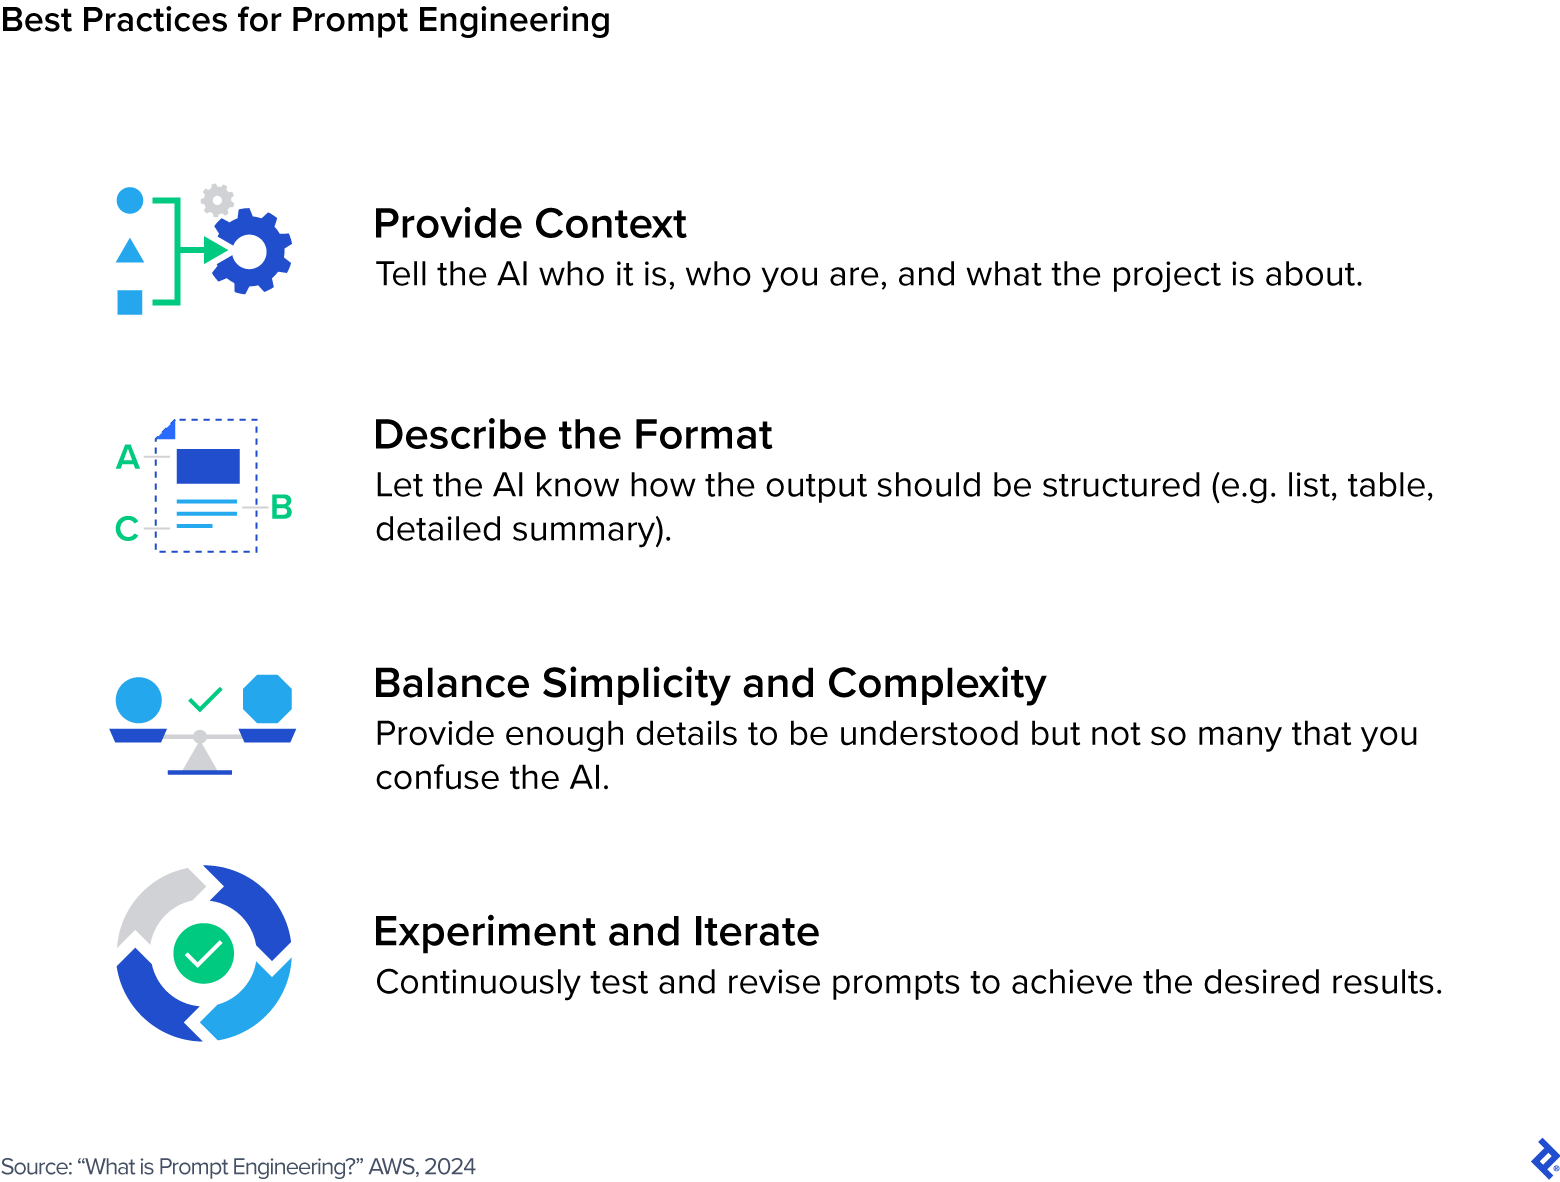 Best practices for prompt engineering: provide context, describe the format, balance simplicity with complexity, and experiment and iterate.